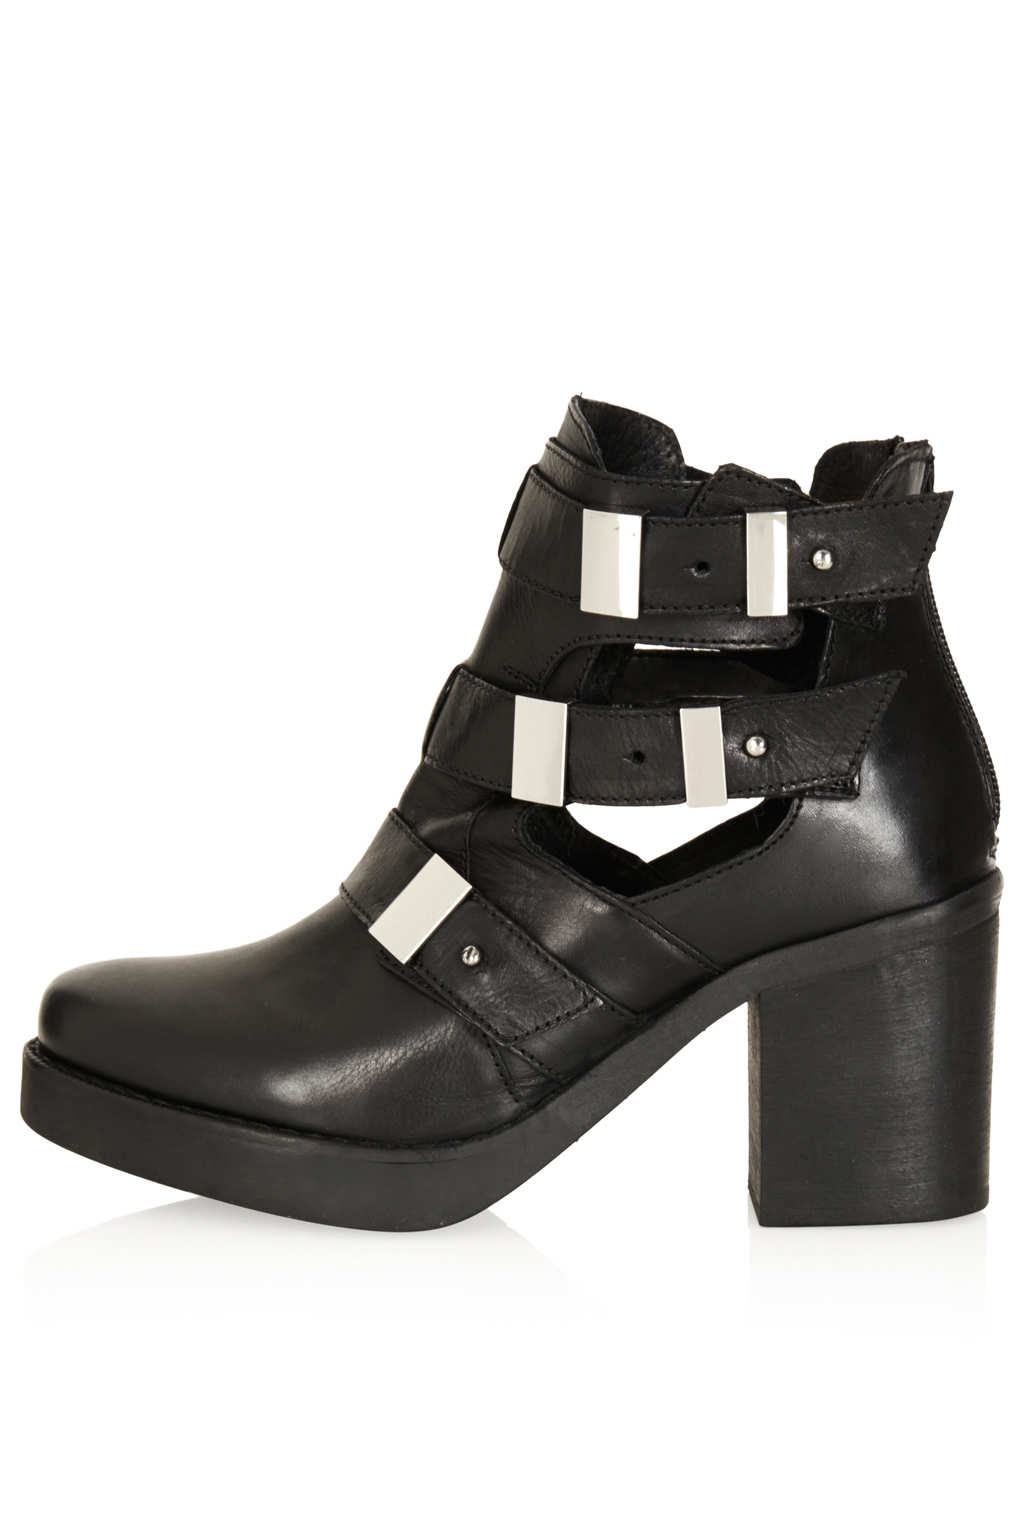 Lyst - Topshop Aubrey2 Cut Out Boots in Black